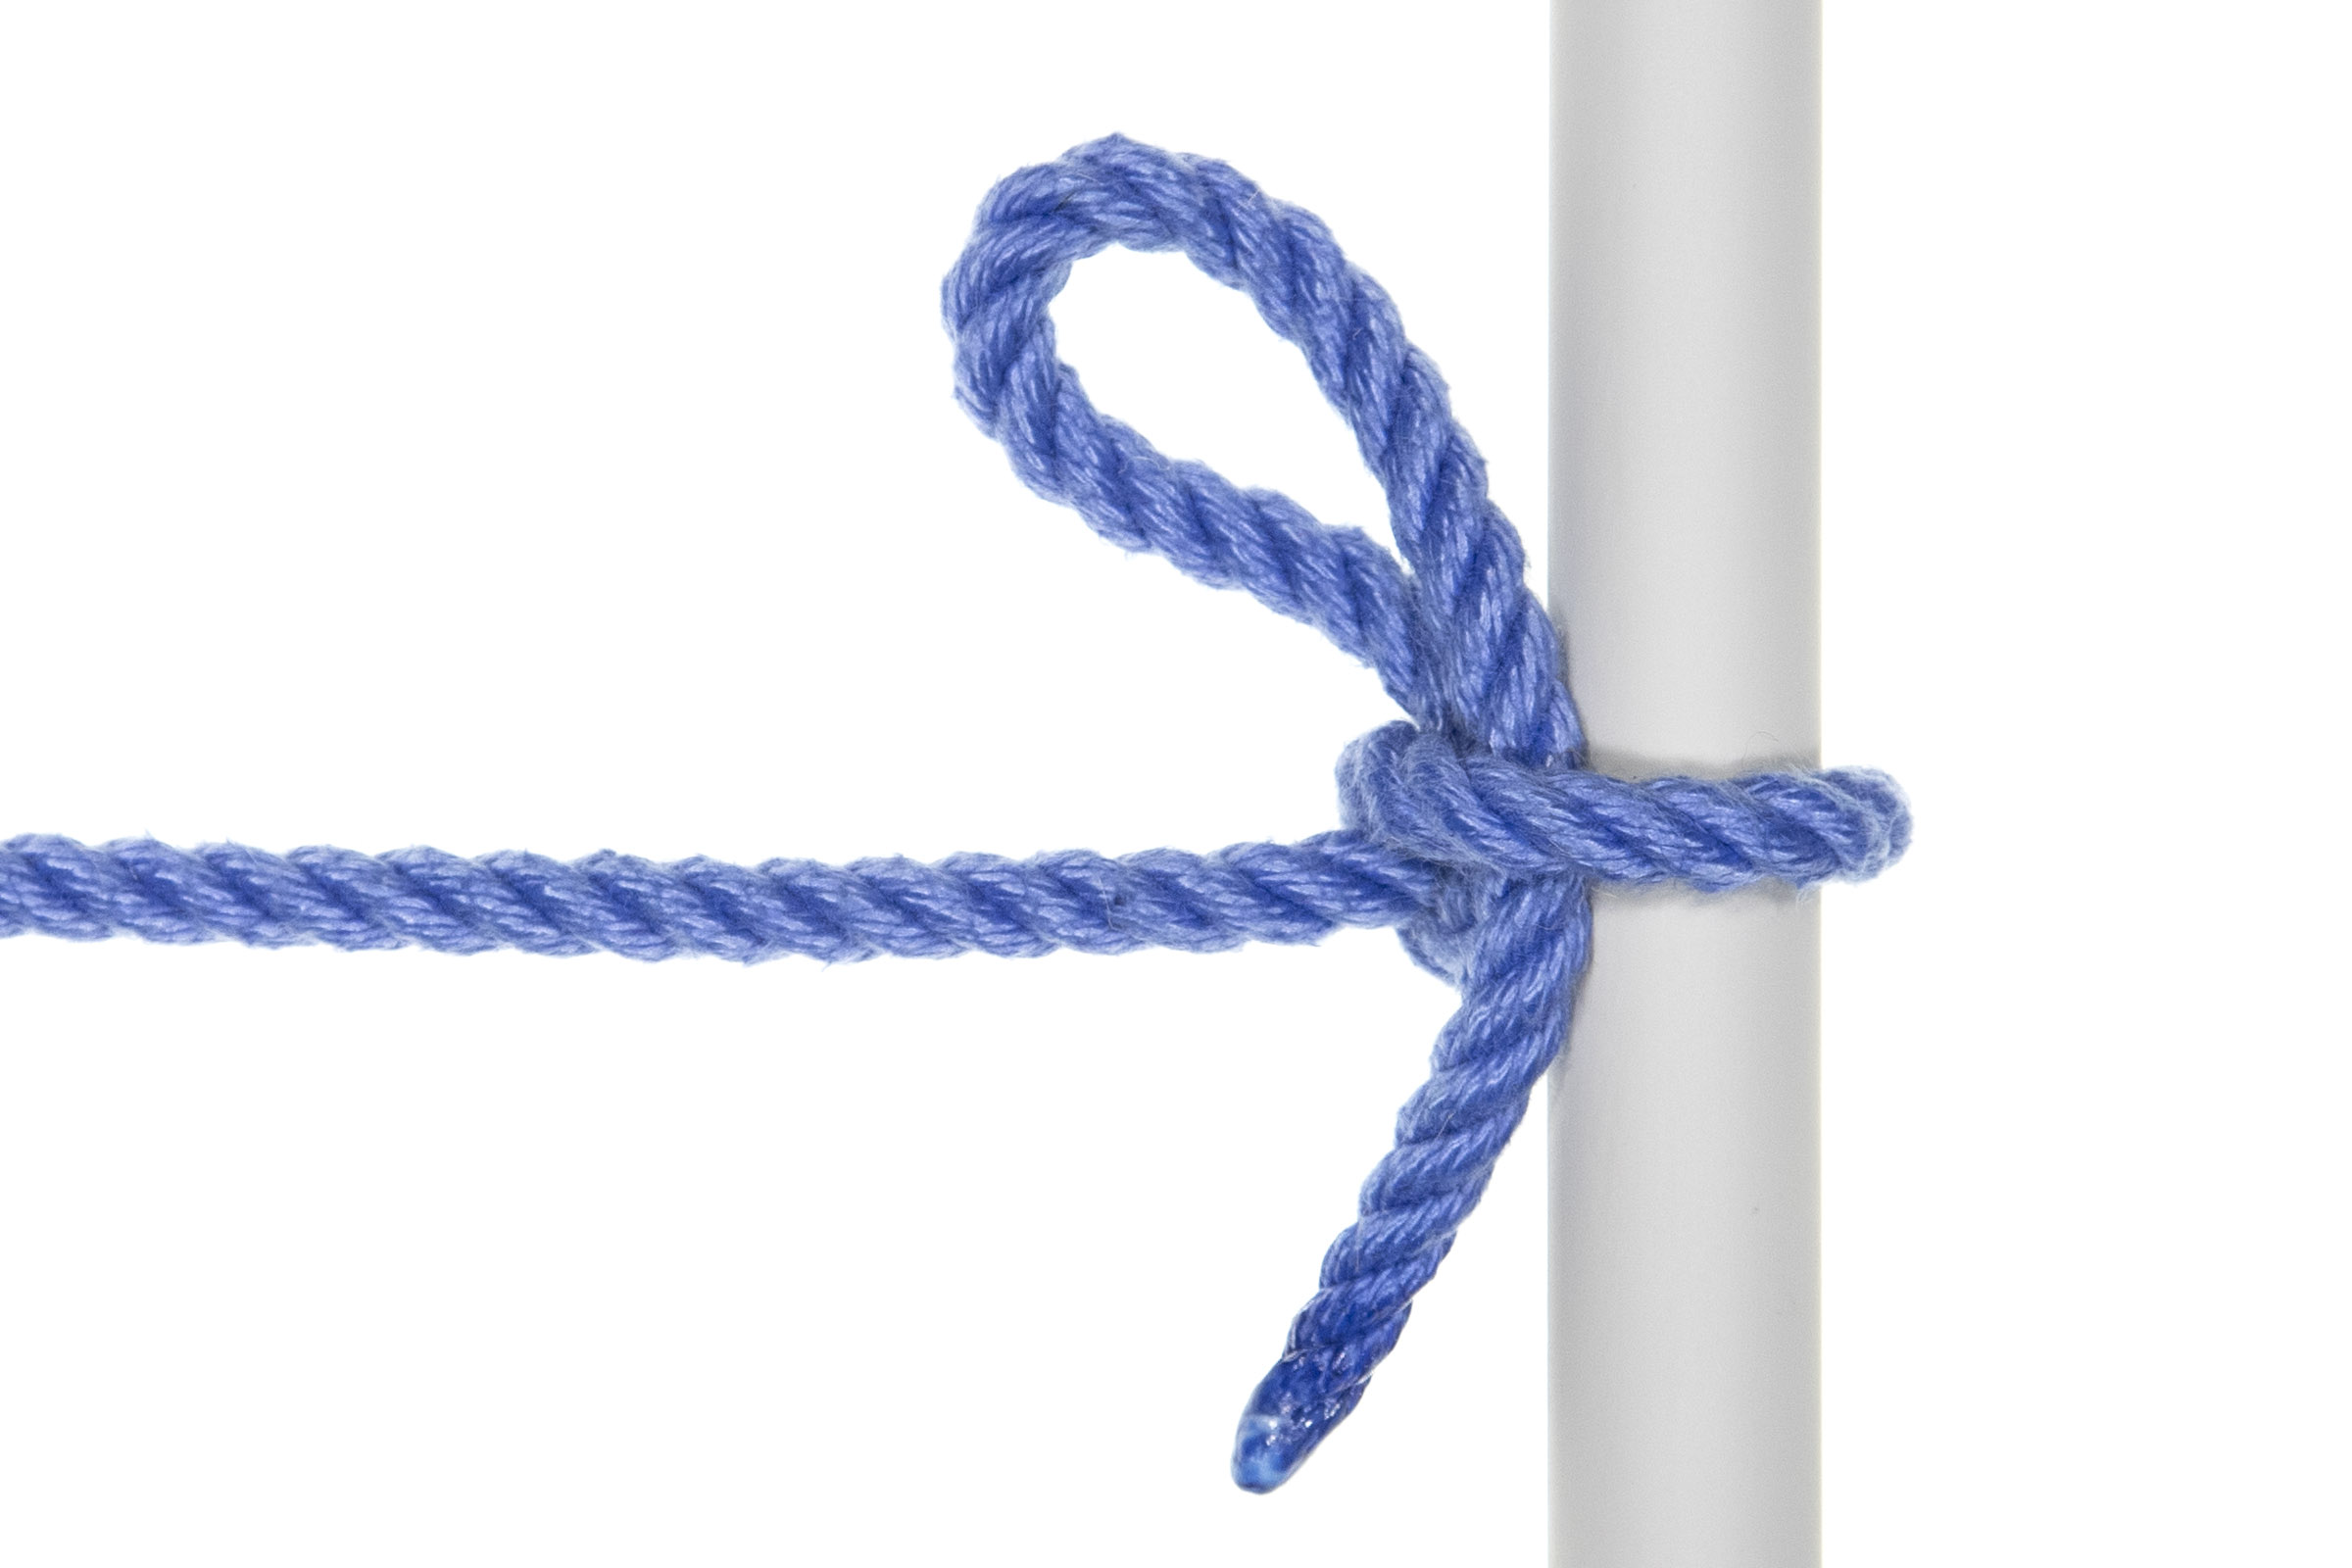 A one inch gray pole crosses the frame from top to bottom. A single strand of blue rope enters from the left and is tied around the pole in a slipped half hitch. A bight of rope exits the top of the knot, and the single end of the rope exits the bottom of the knot.